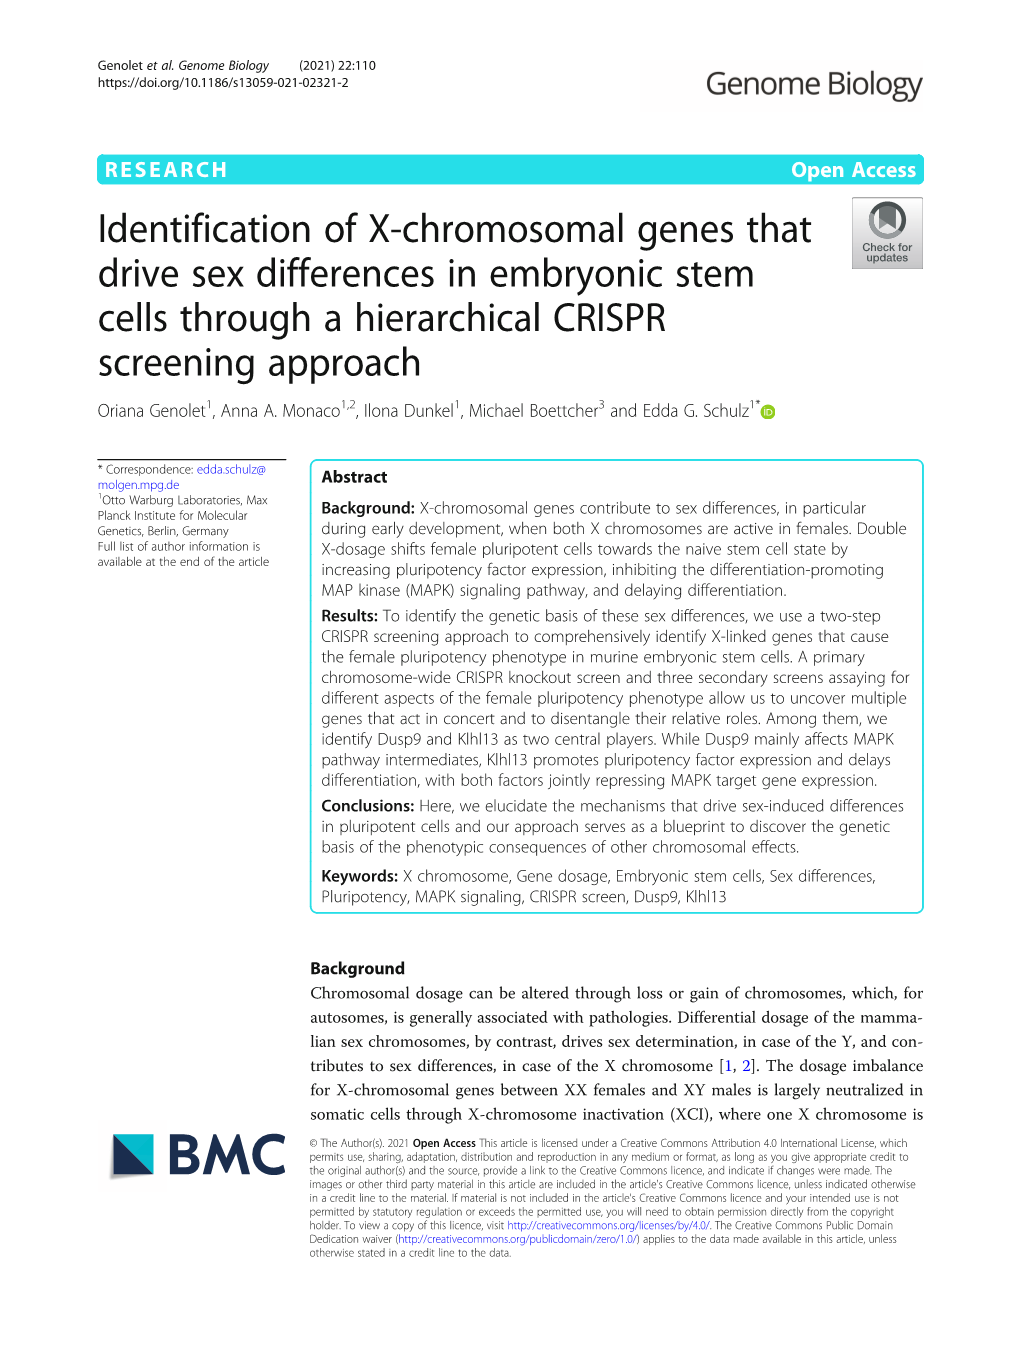 Identification of X-Chromosomal Genes That Drive Sex Differences in Embryonic Stem Cells Through a Hierarchical CRISPR Screening Approach Oriana Genolet1, Anna A